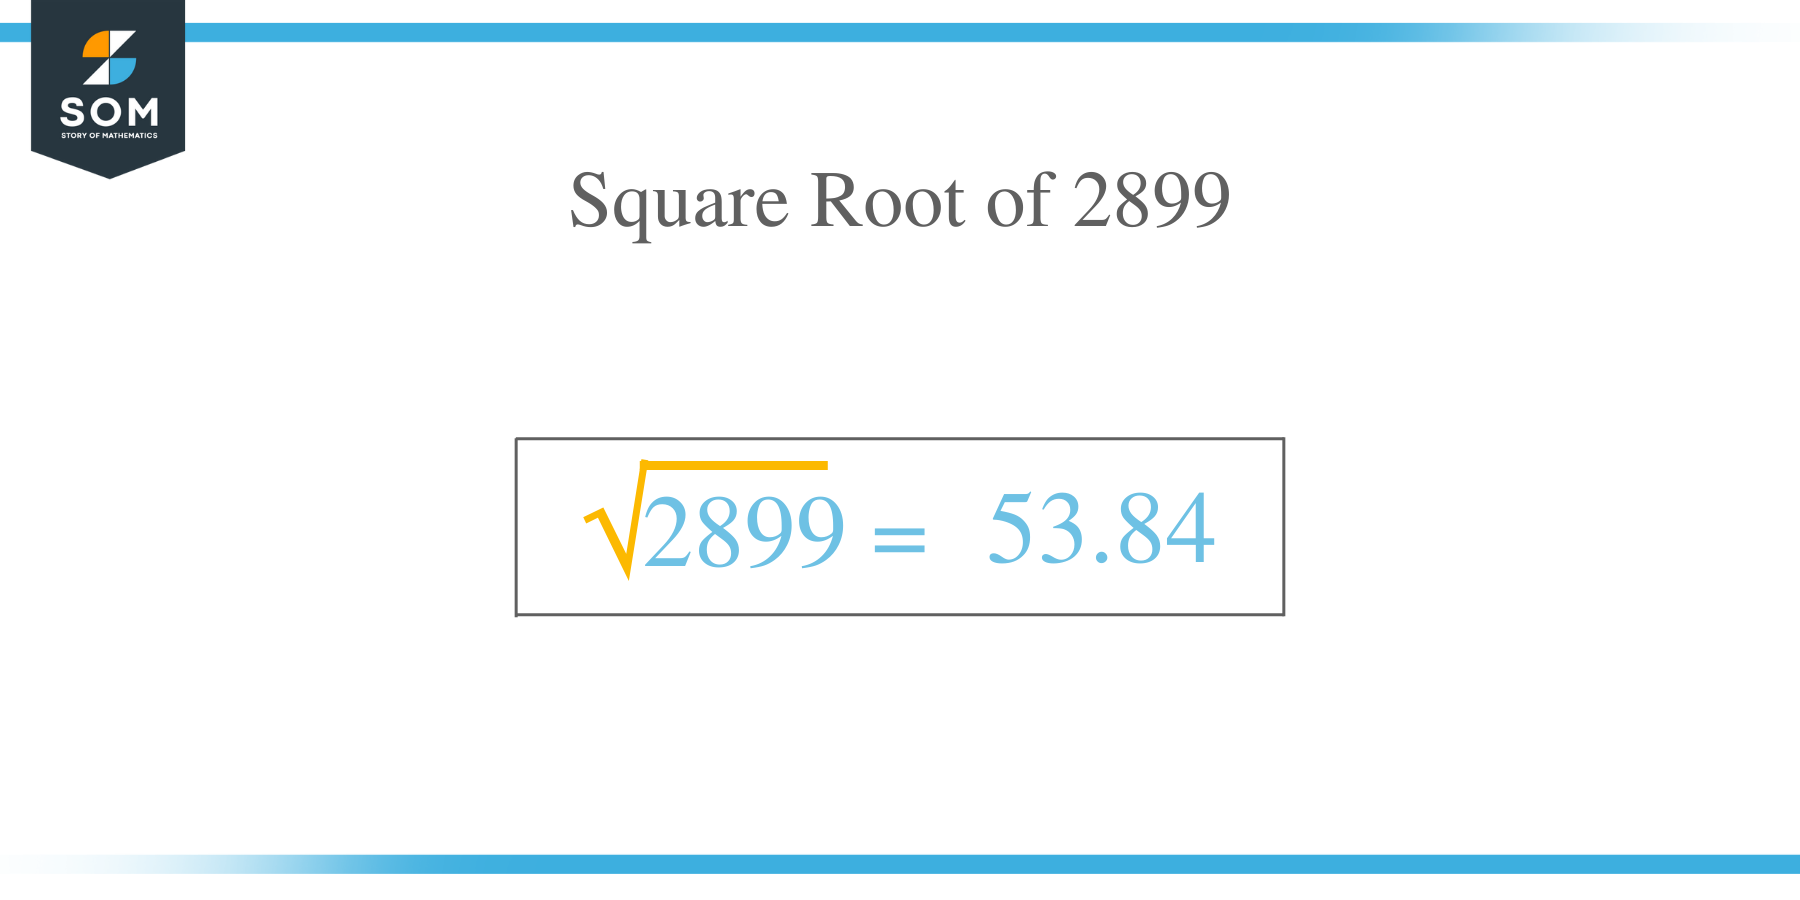 Square Root of 2899